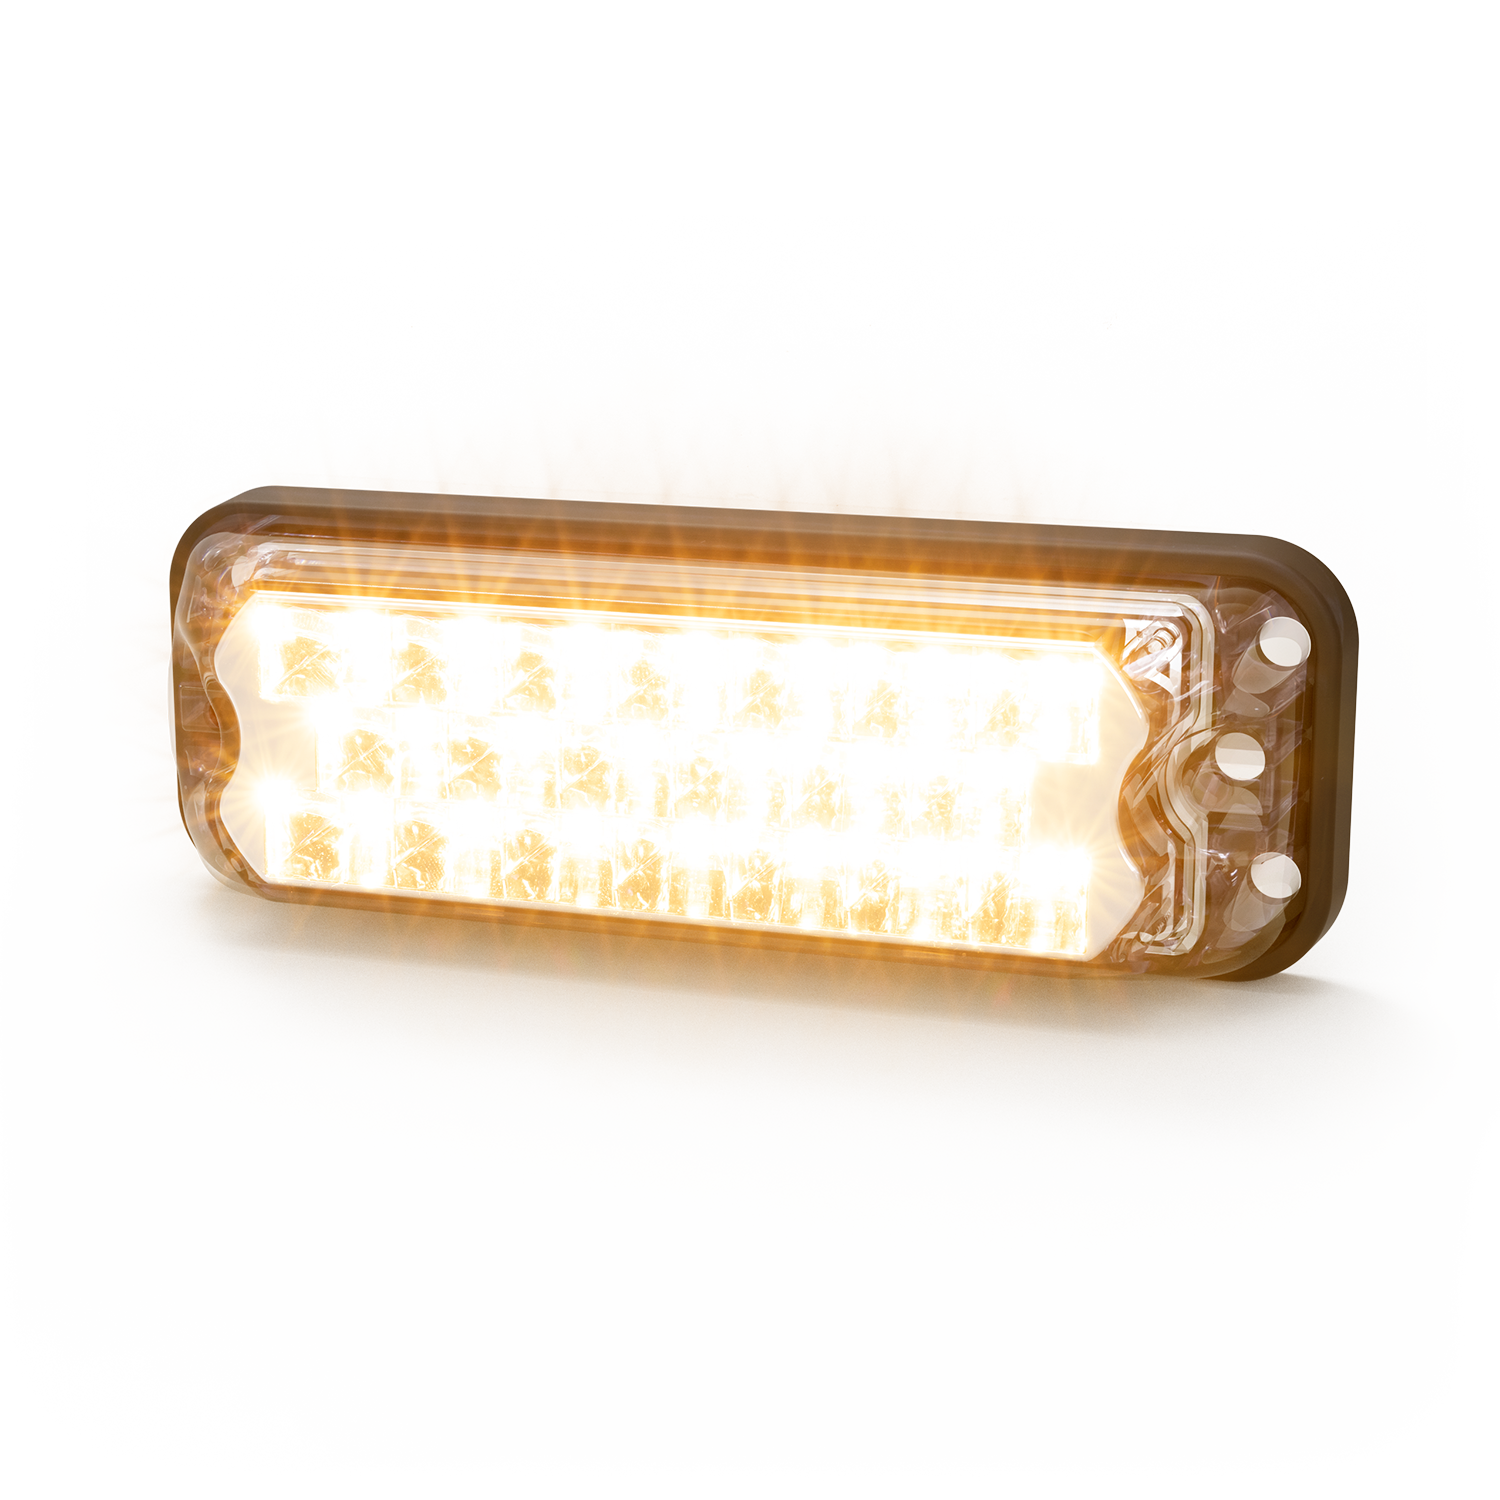 ECO 3811A ECCO Directional 20 LED Light (6.1", Amber, Surface)